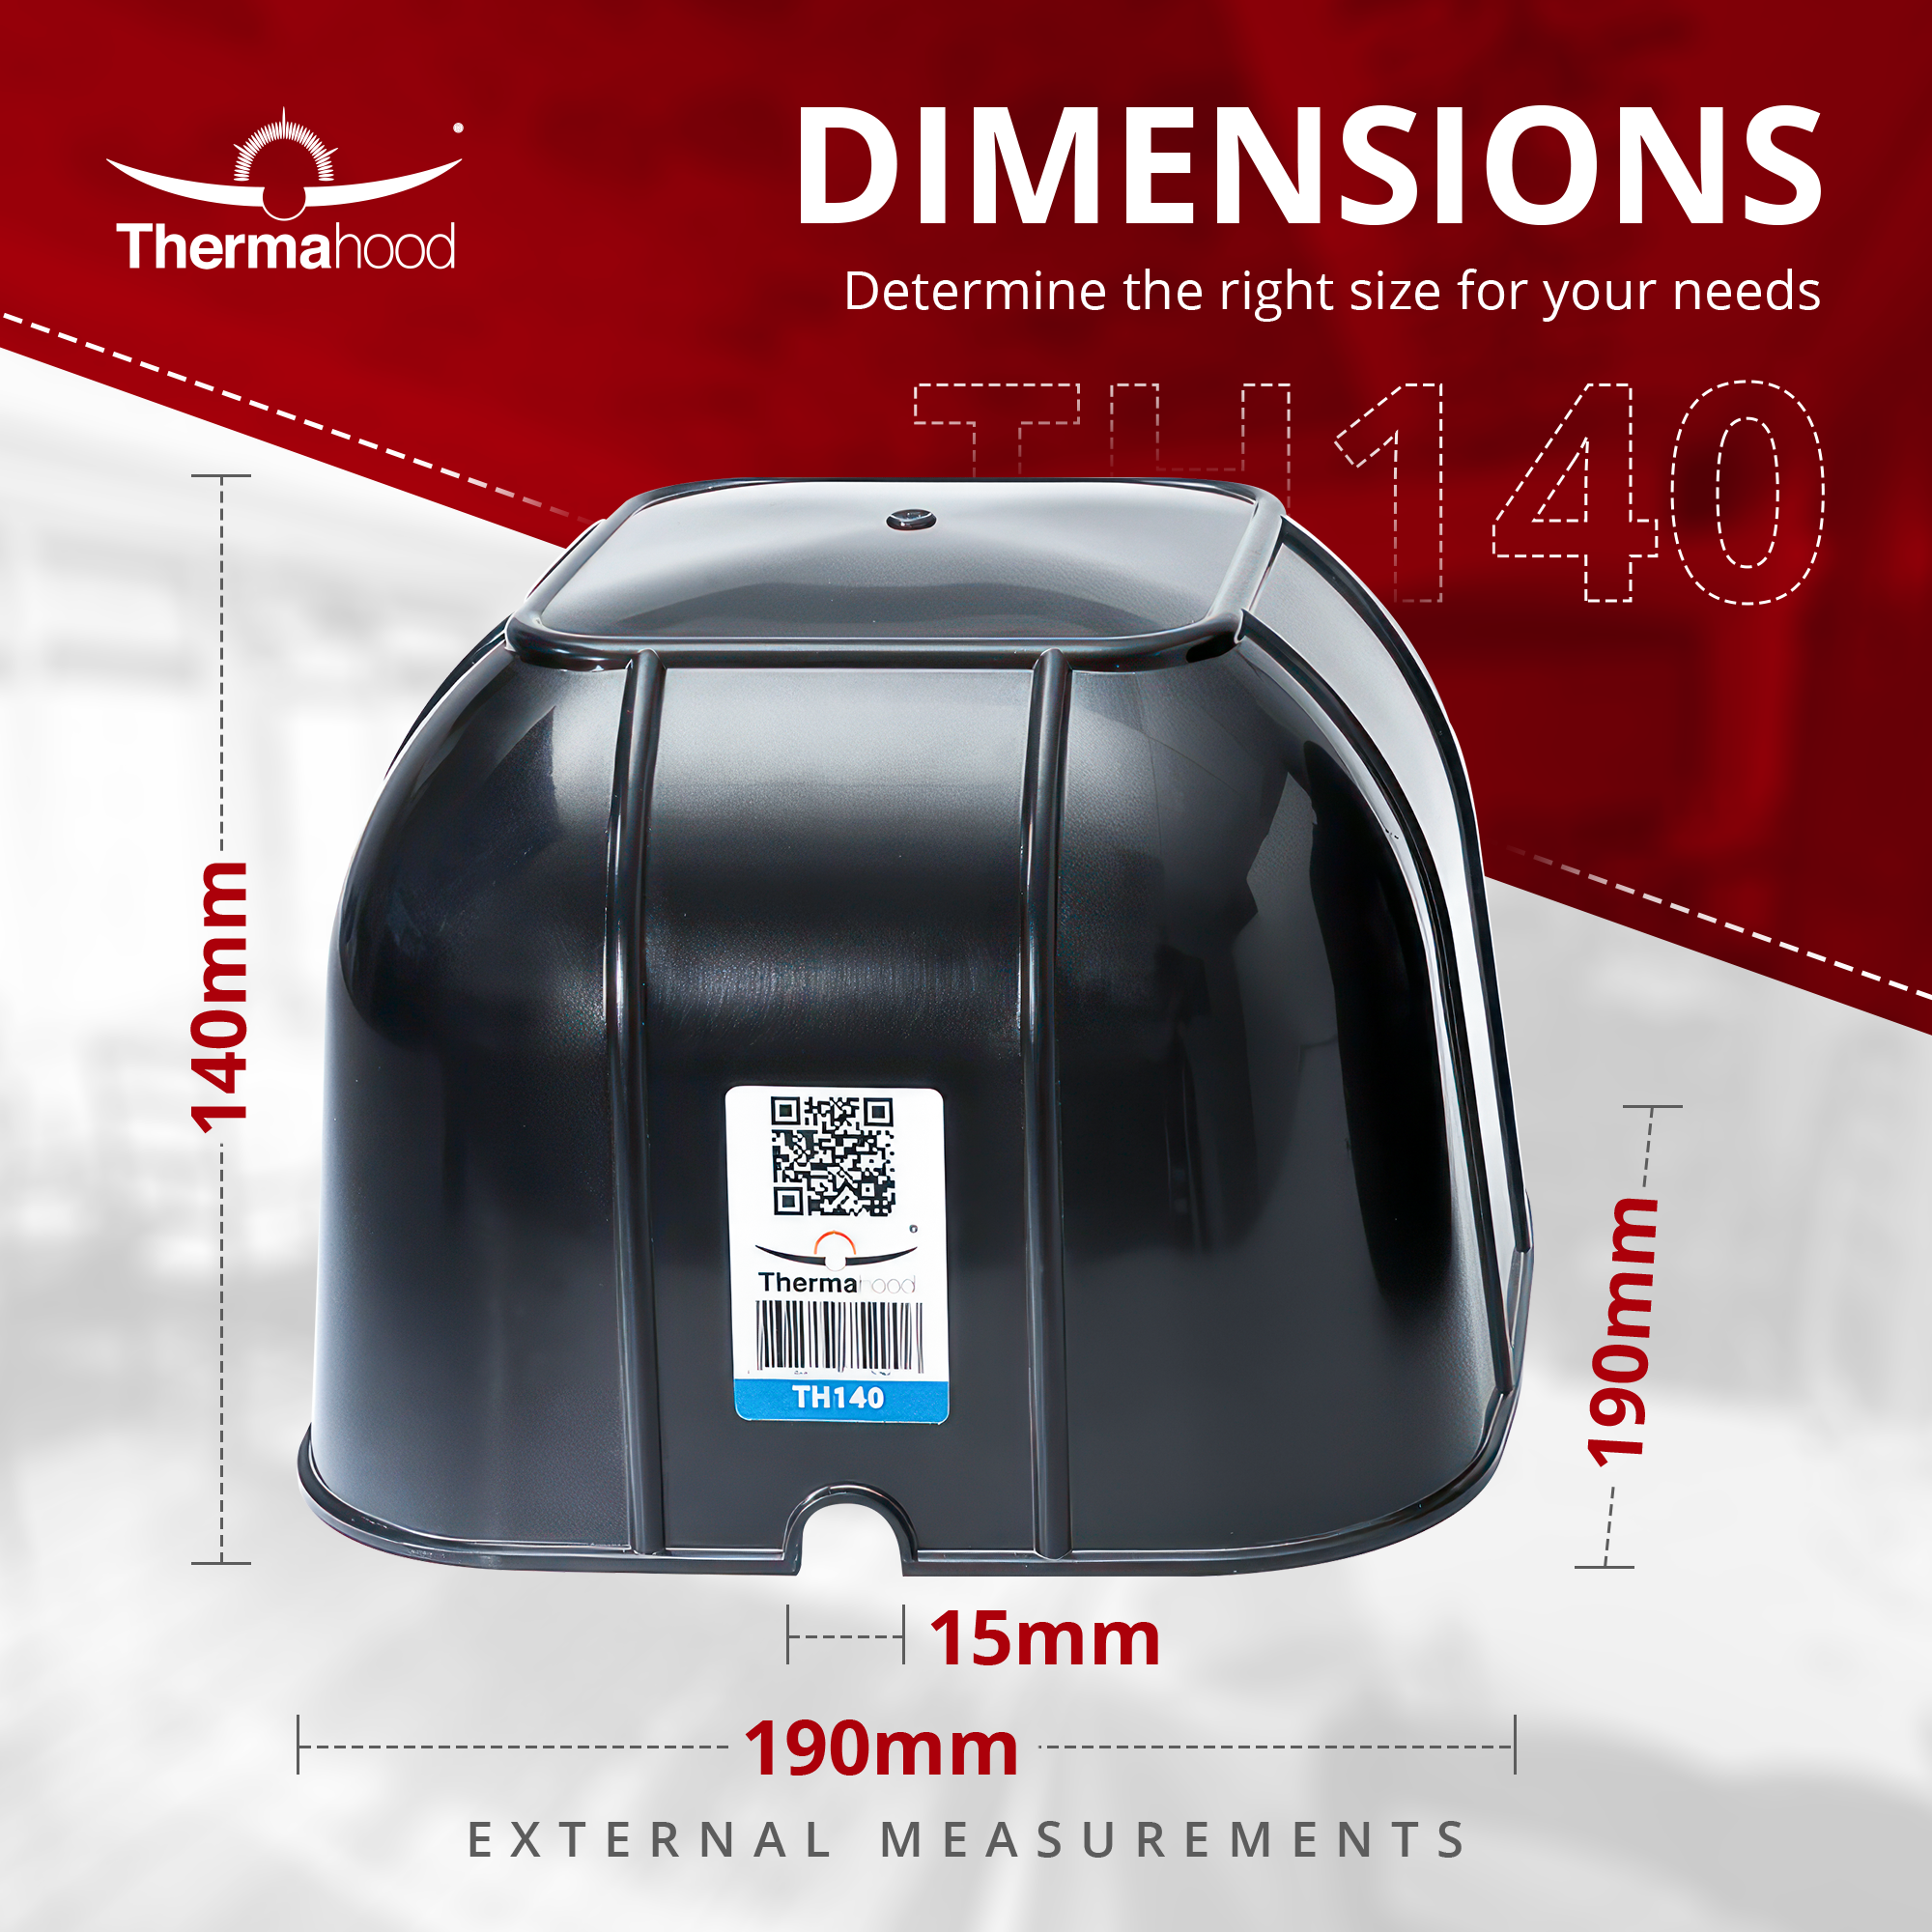 TH 140 product image with dimensions